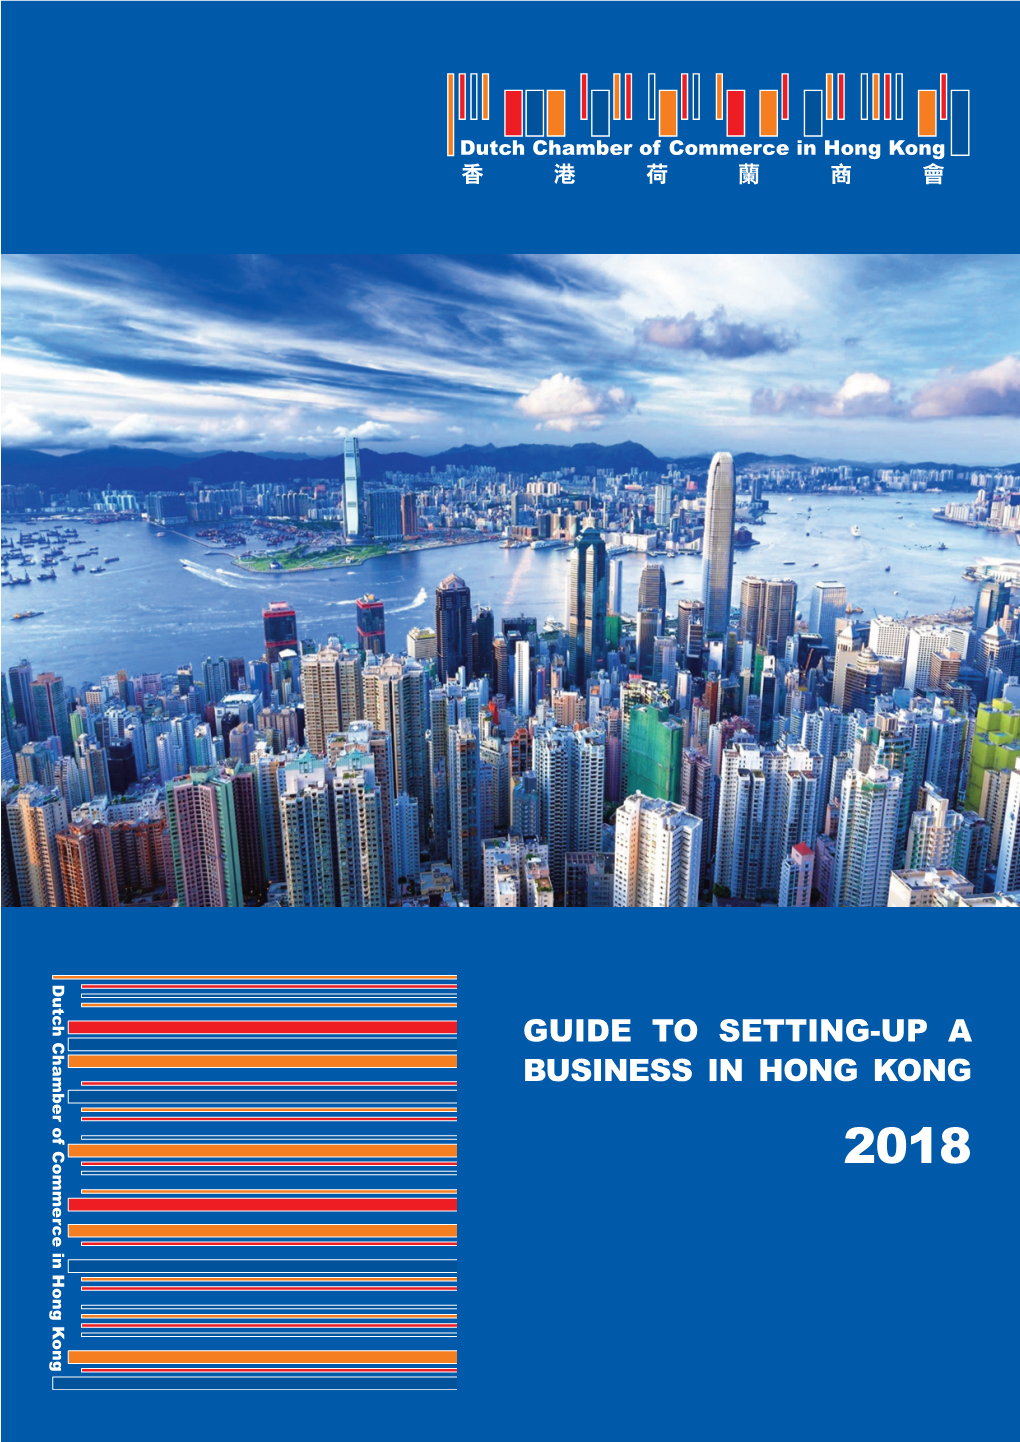 Guide to Setting-Up a Business in Hong Kong 2018